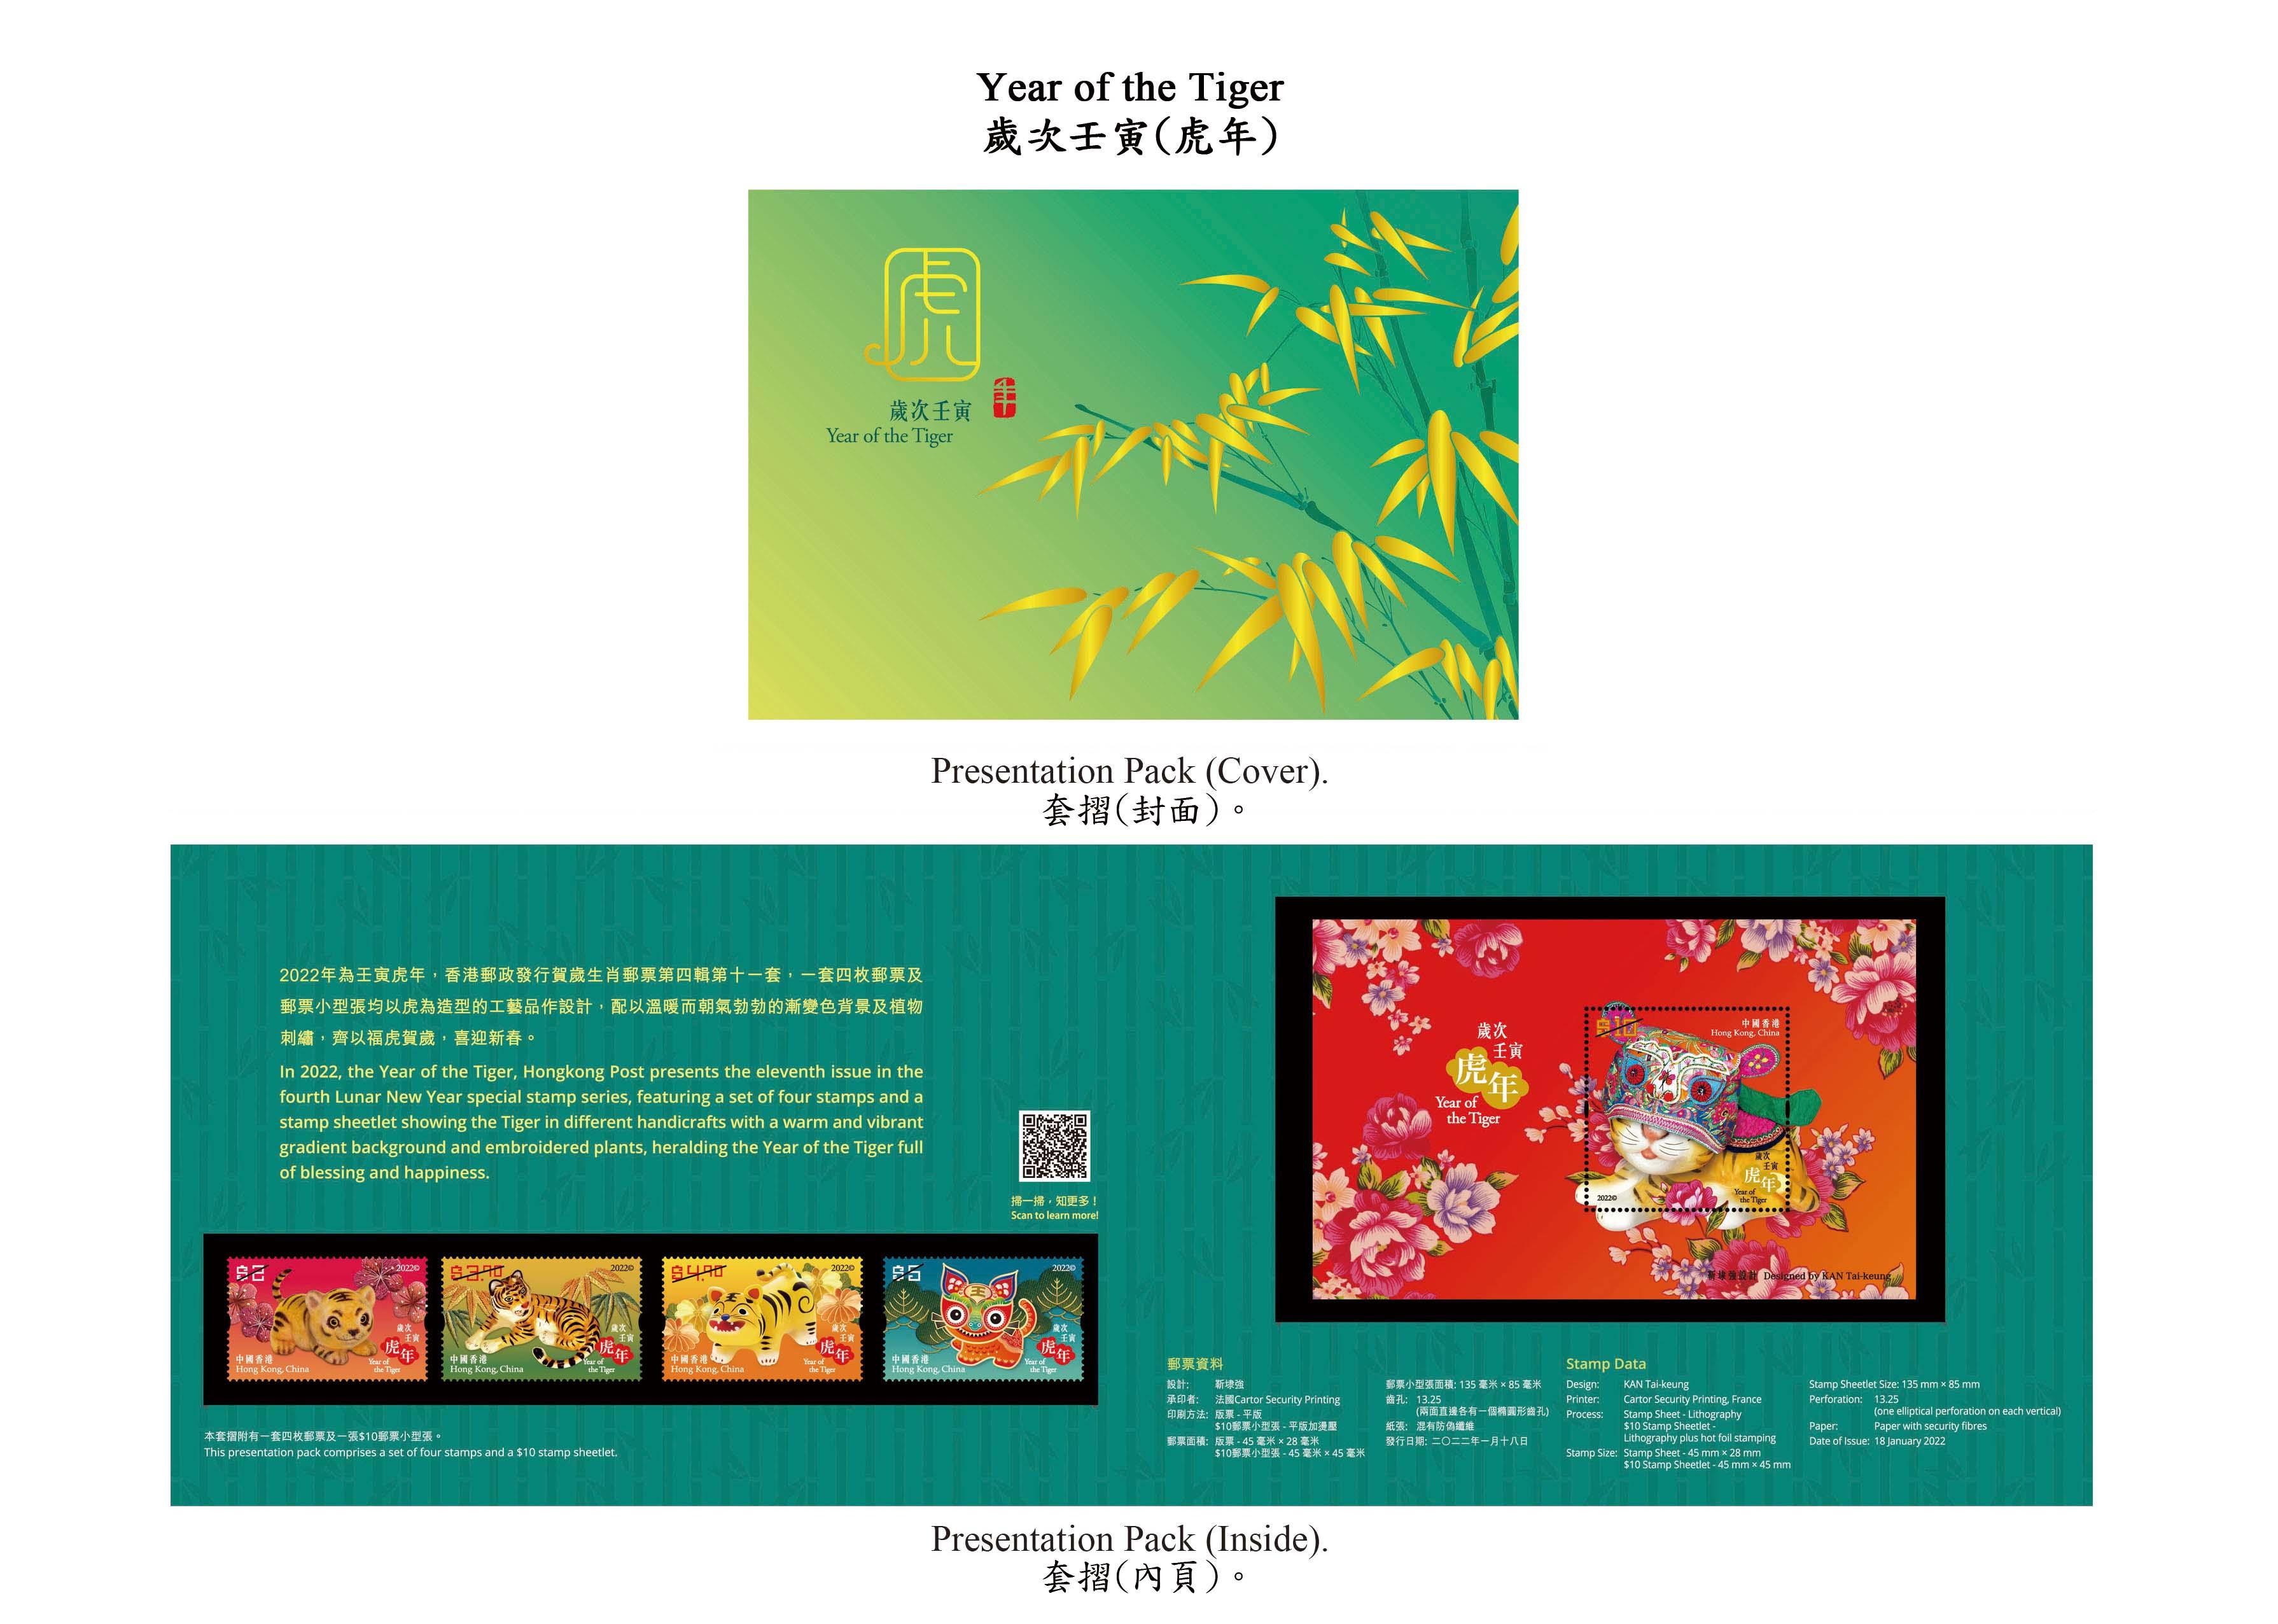 Hongkong Post will launch a special stamp issue and associated philatelic products with the theme "Year of the Tiger" on January 18 (Tuesday). Photo shows the presentation pack.

